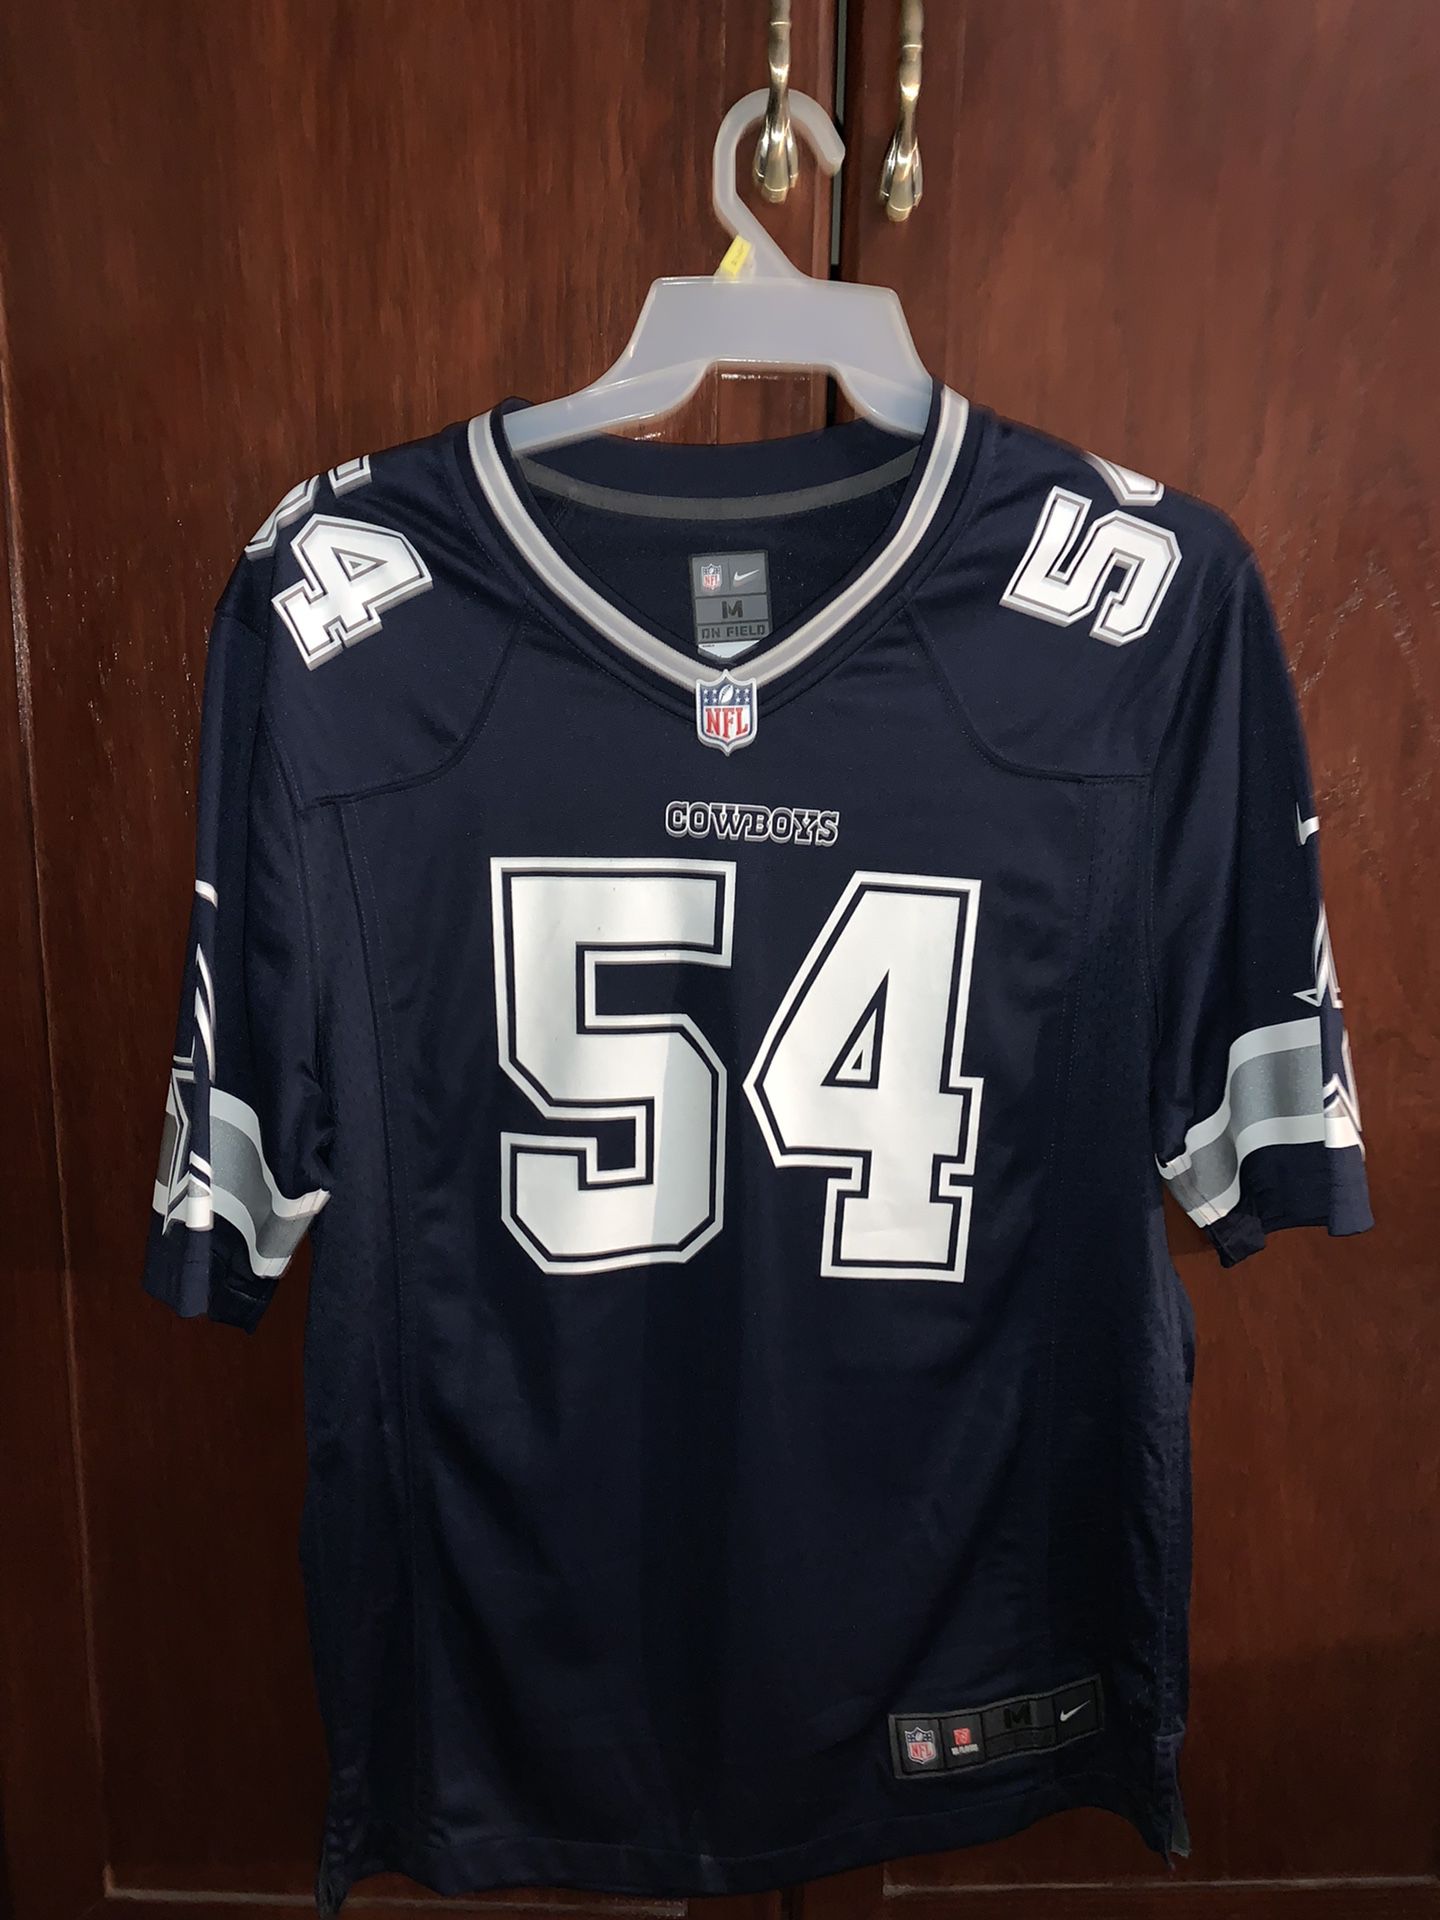 Dallas Cowboys Jersey authentic NFL SHOP Nike for Sale in Stockton, CA -  OfferUp